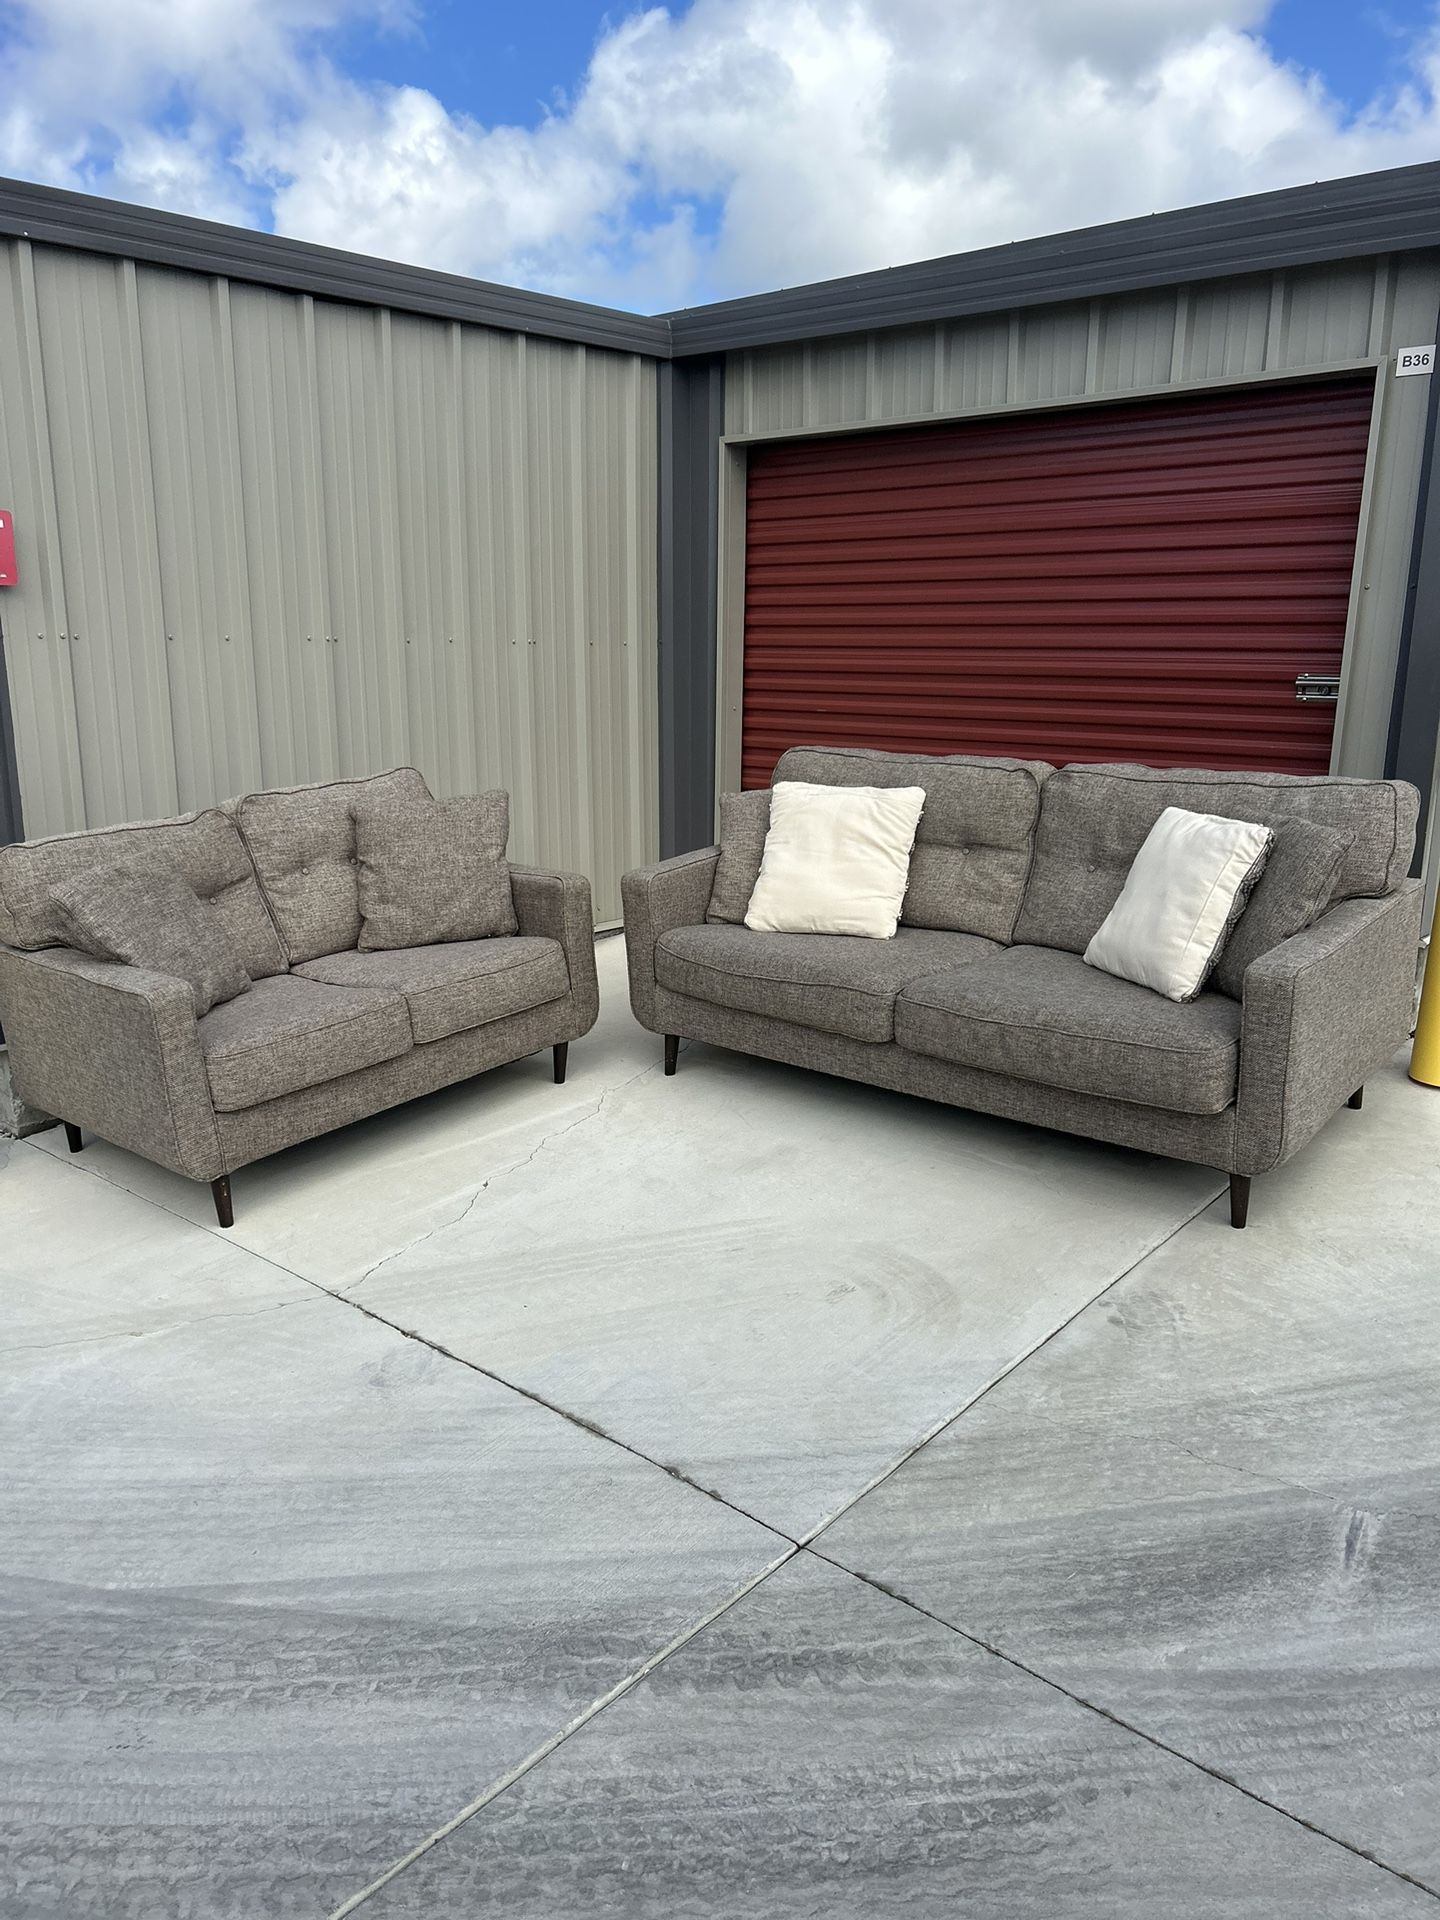 FREE DELIVERY&INSTALLATION Gray Couch+Loveseat Set